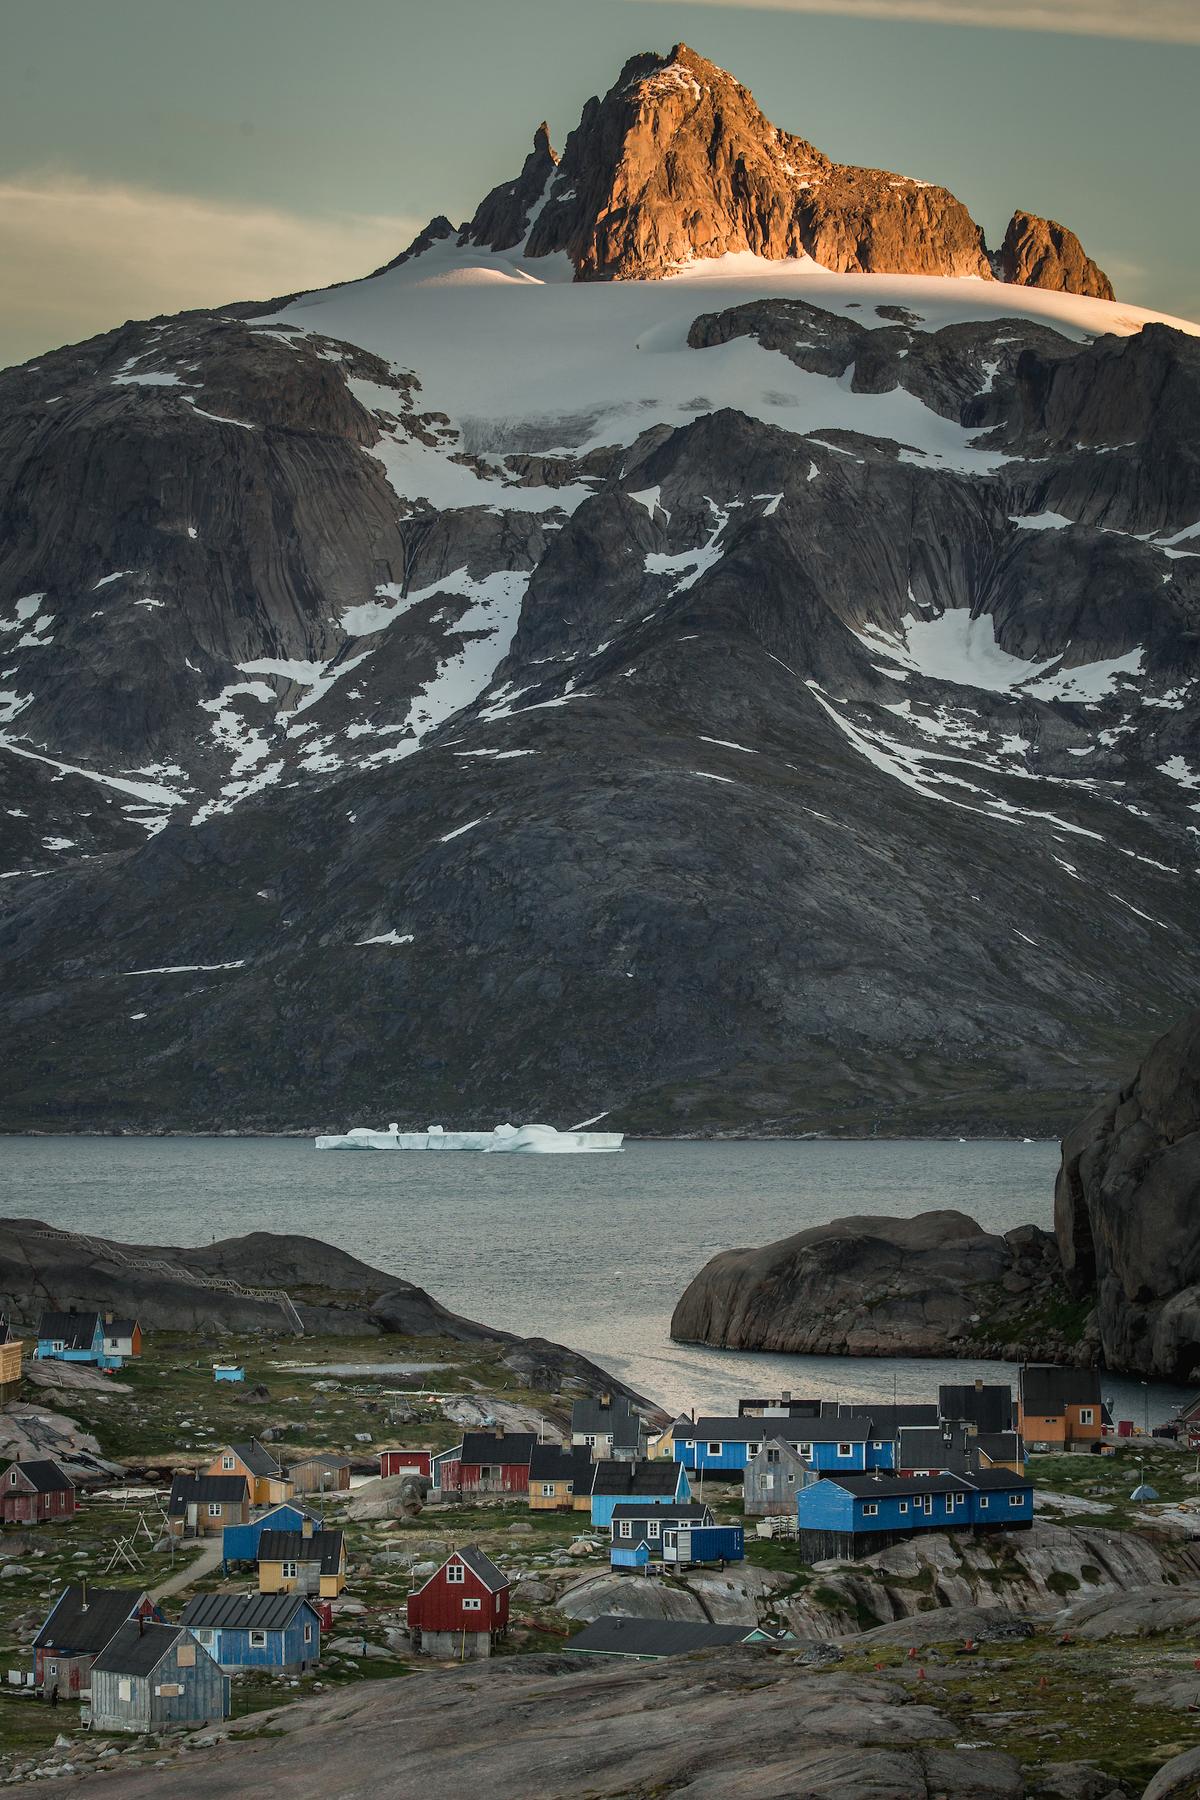 An evening view of the village of Aappilattoq in south Greenland. (Mads Pihl/Visit Greenland)